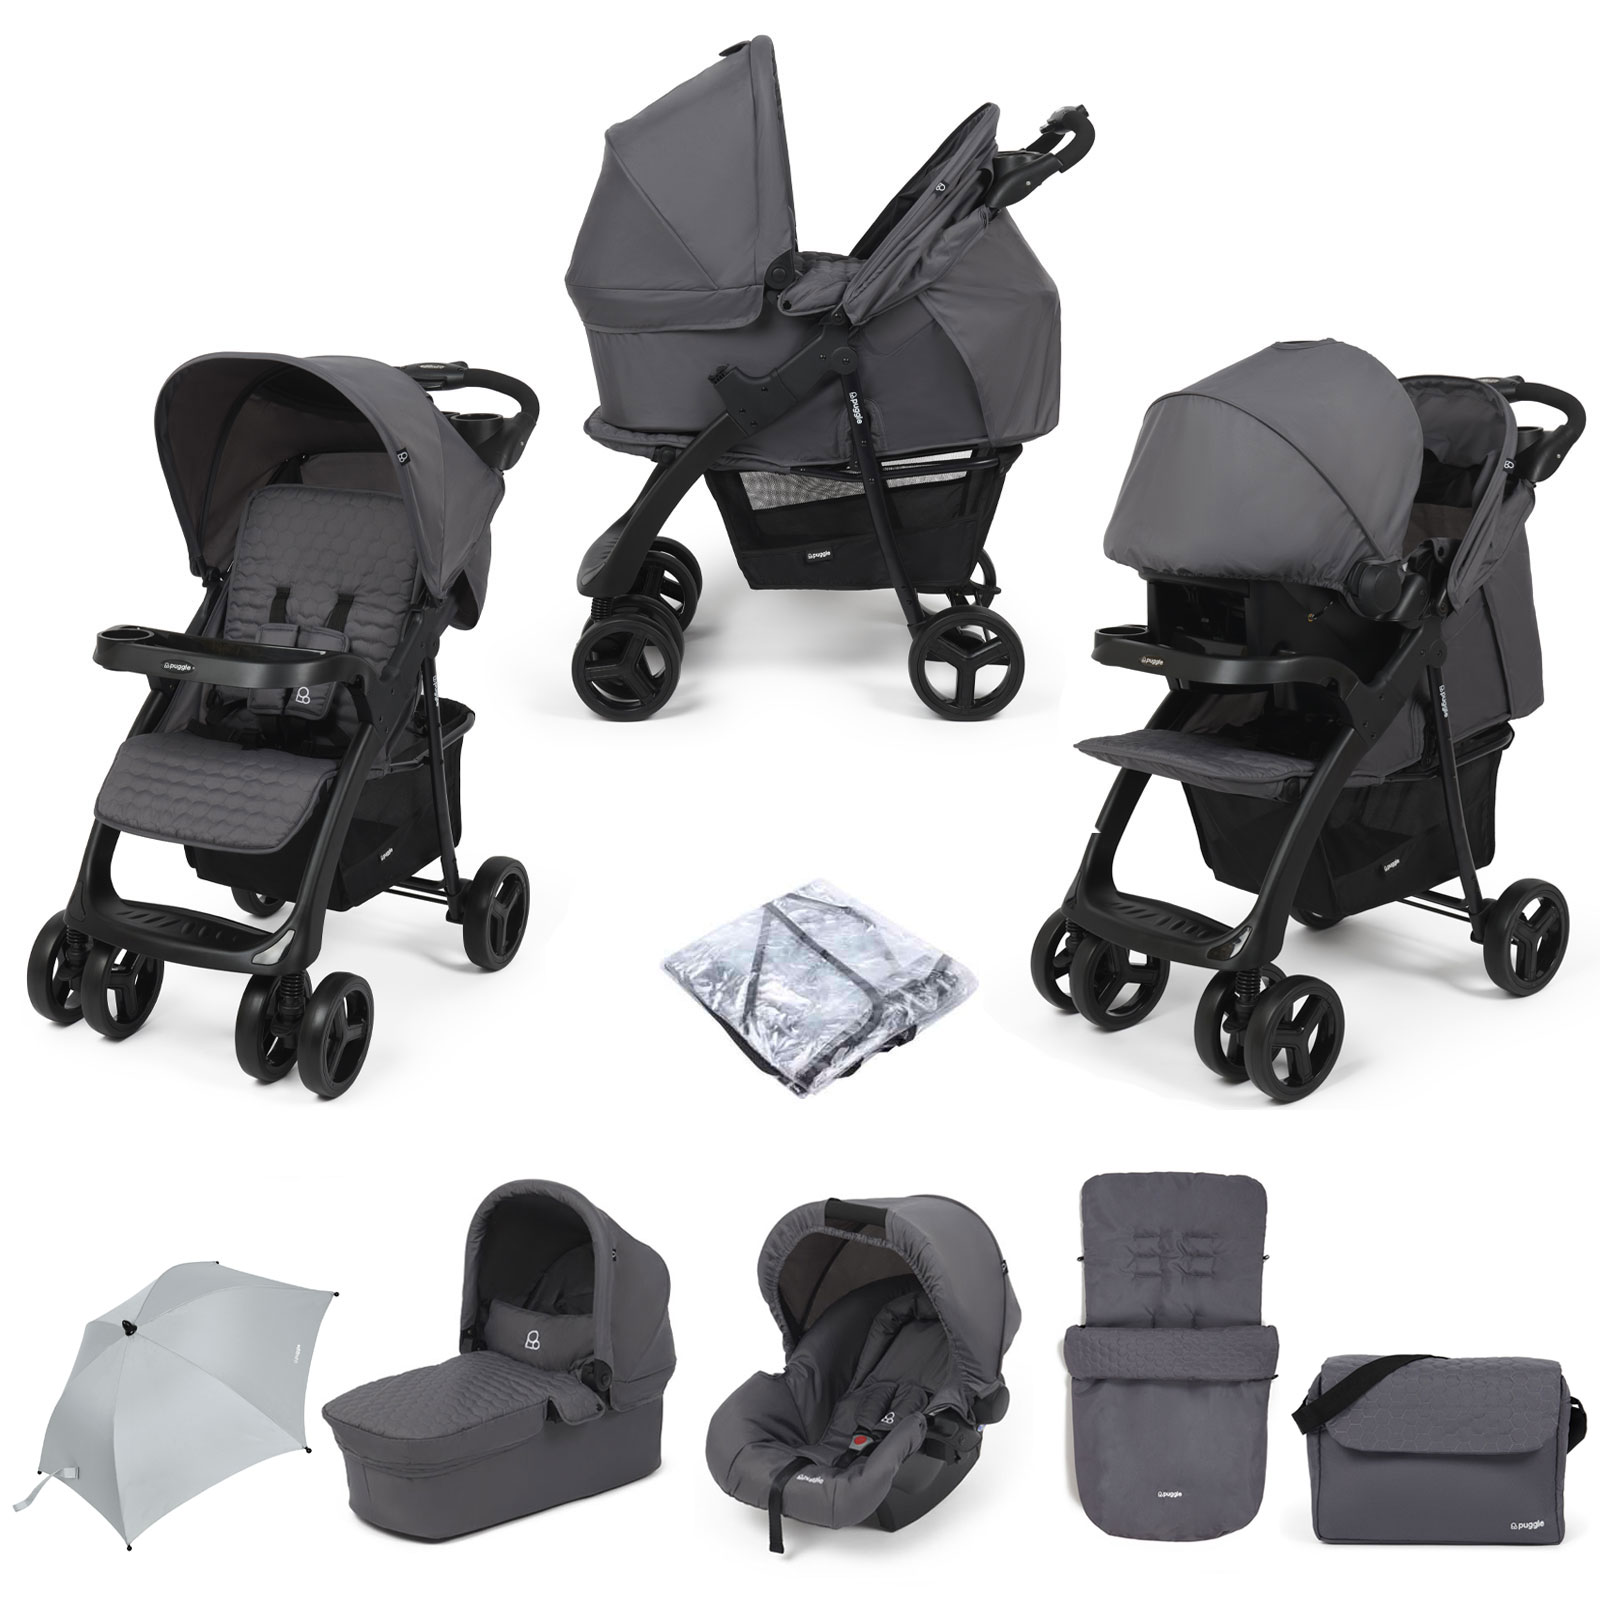 Puggle Denver Luxe 3in1 Travel System with Raincover, Footmuff, Parasol & Changing Bag - Slate Grey